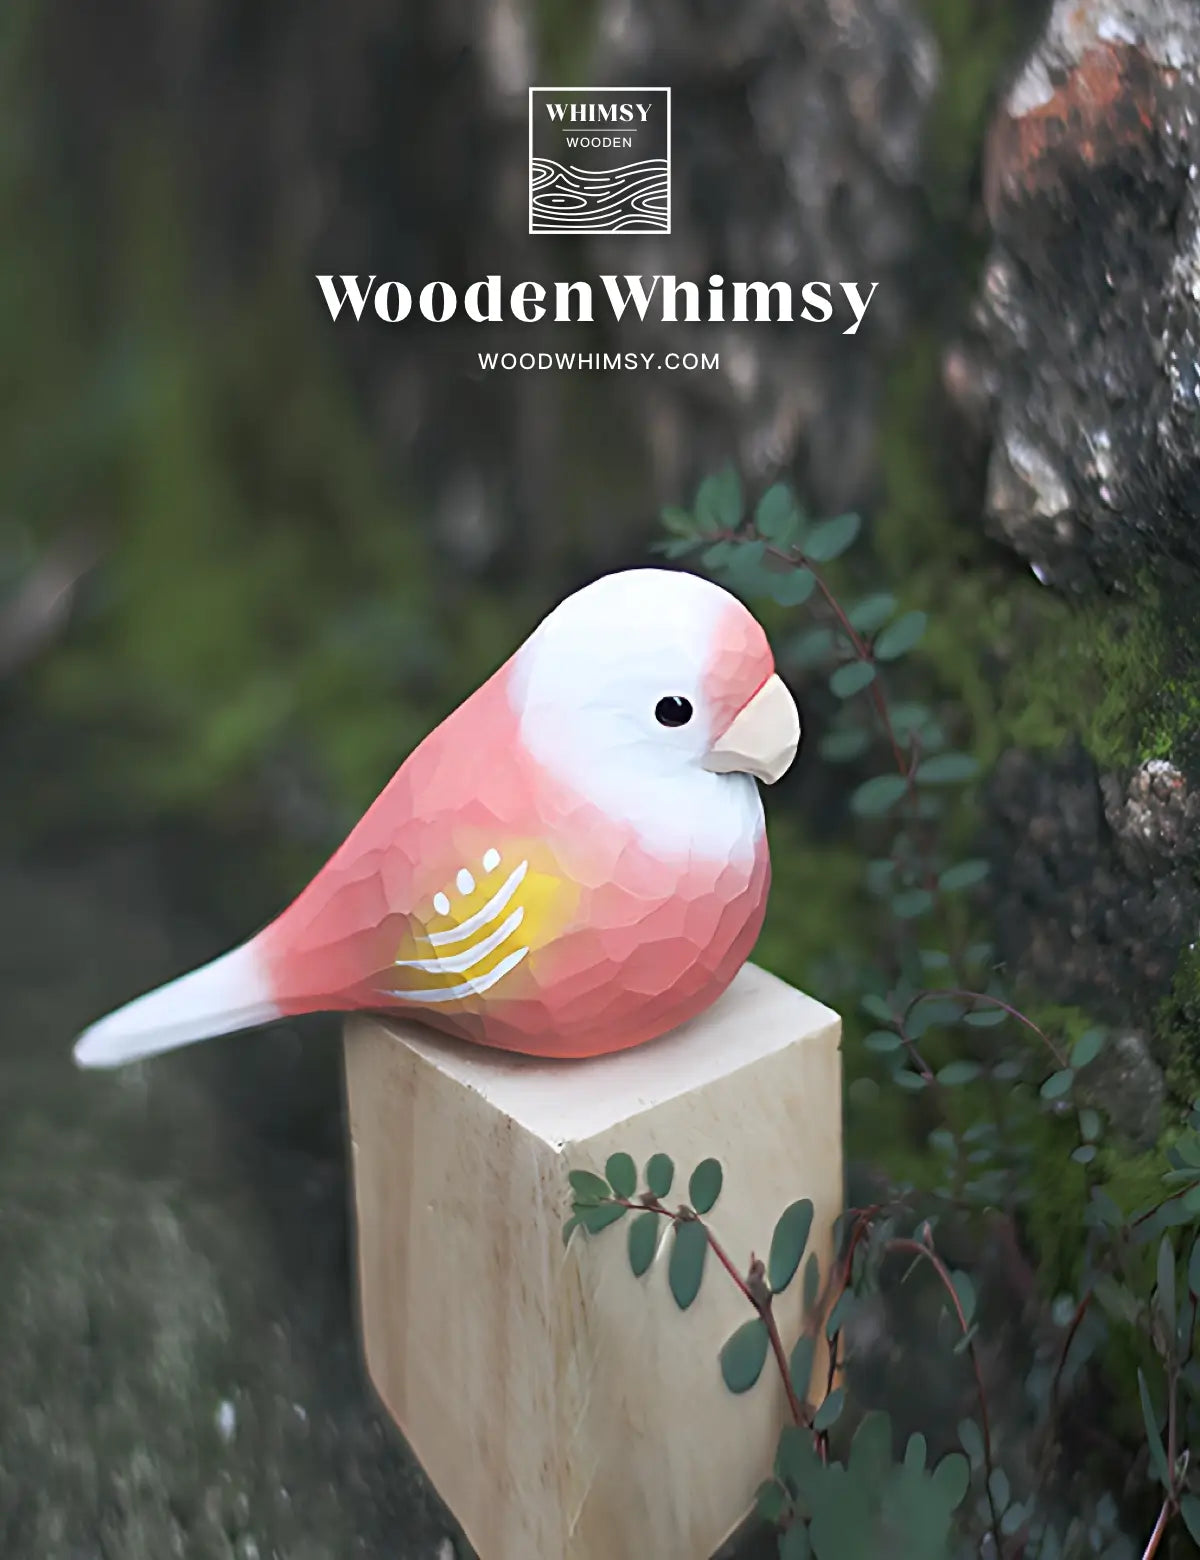 alt="Handcrafted Pink Parakeet Wooden Bird by WoodenWhimsy - Exquisite Home Ornament" - 02